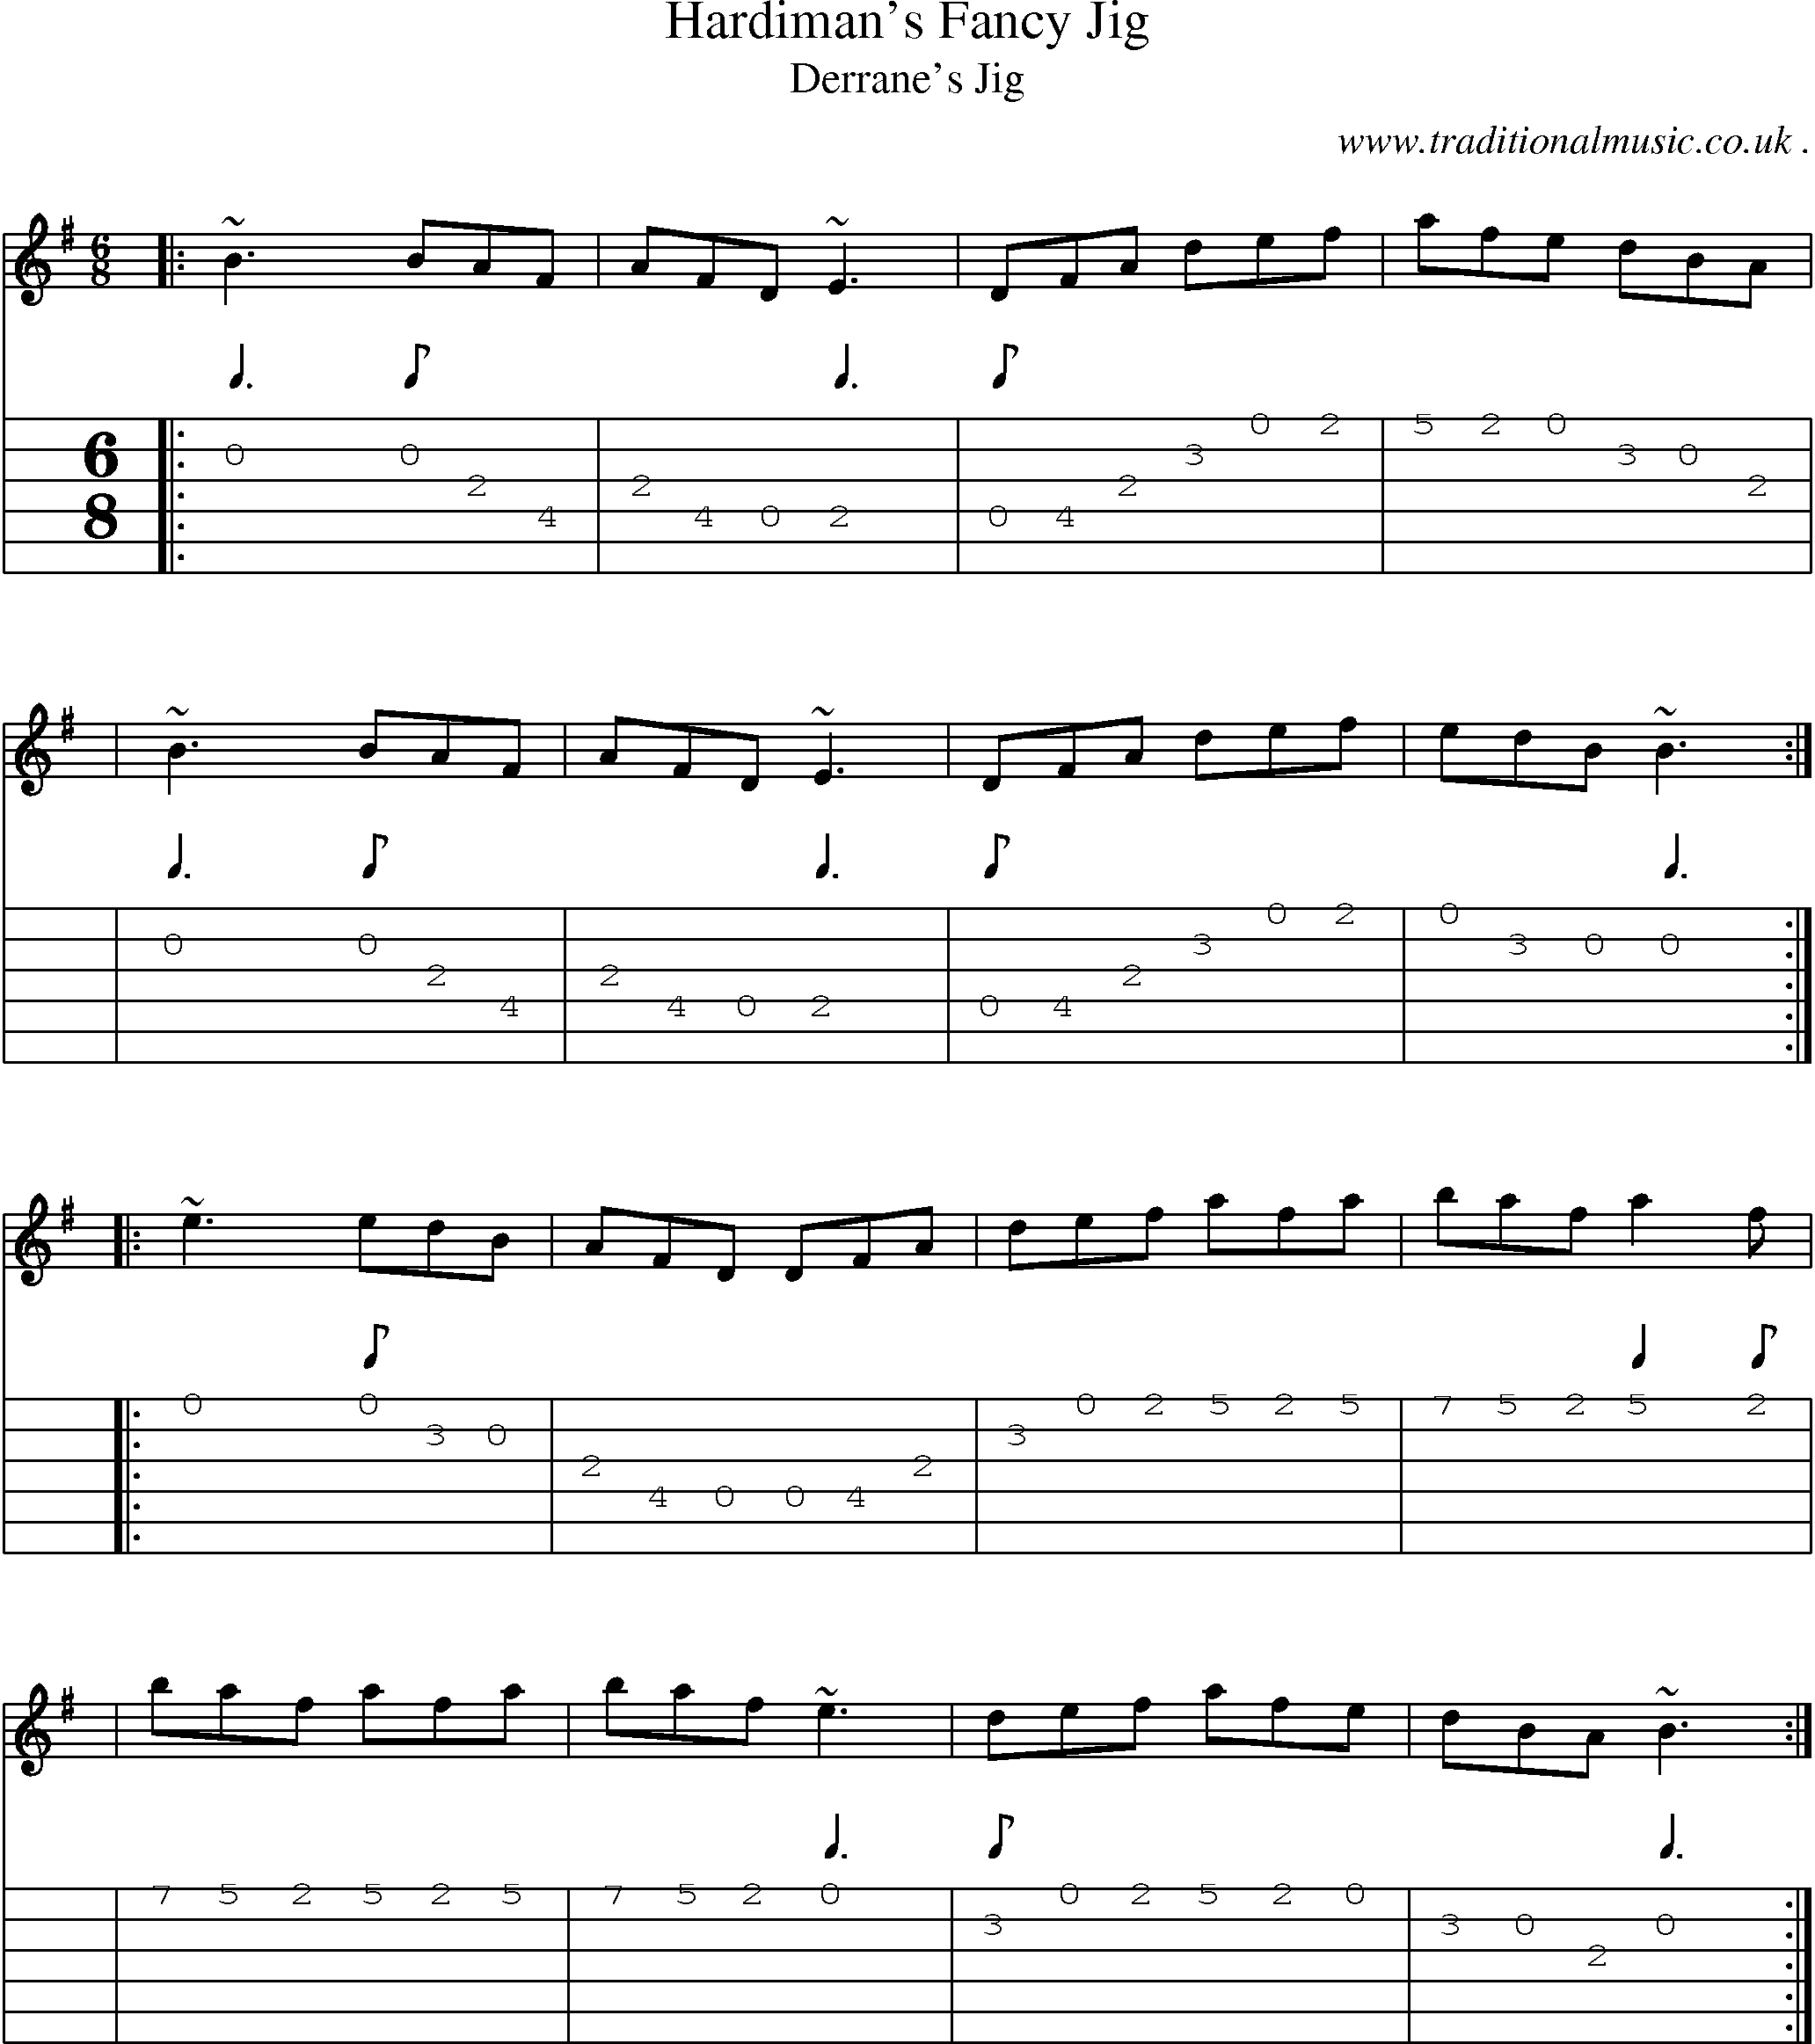 Sheet-music  score, Chords and Guitar Tabs for Hardimans Fancy Jig